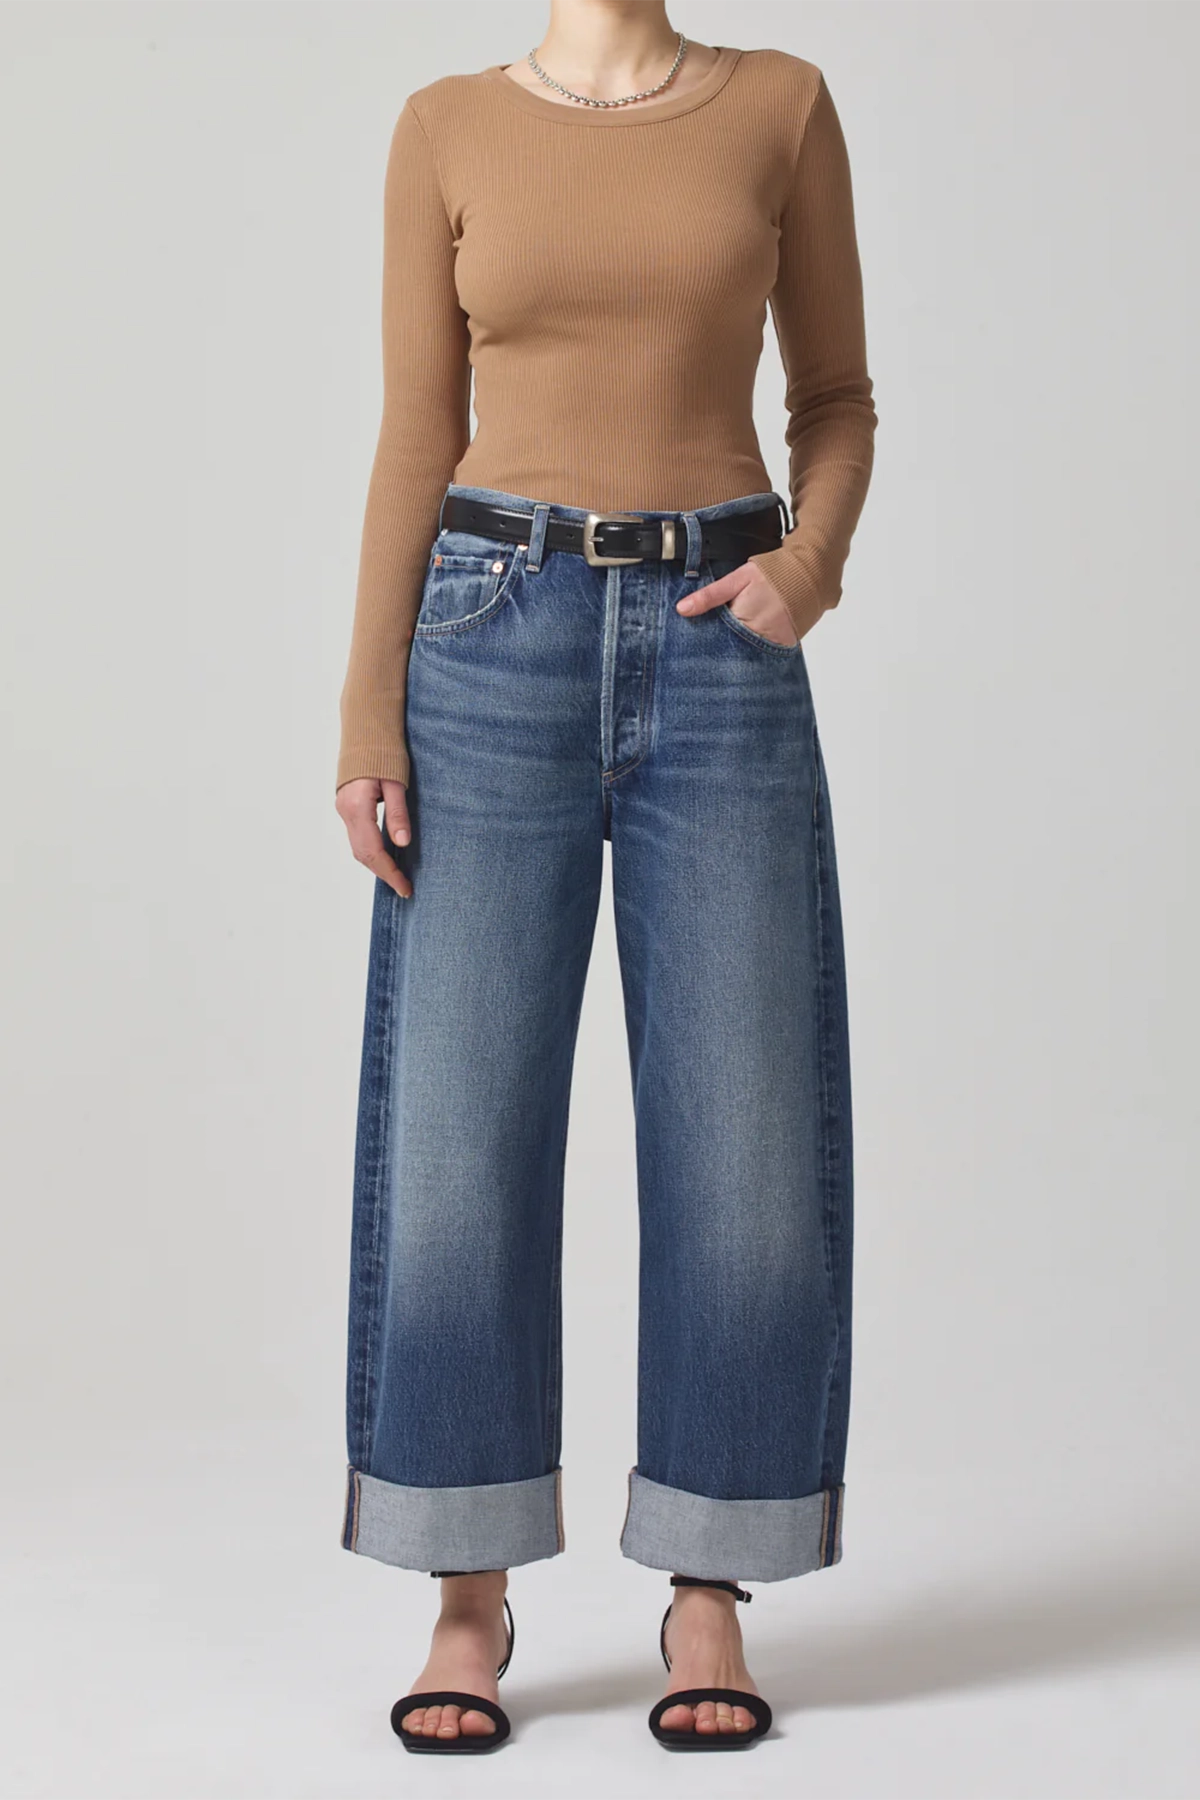 Citizens of Humanity Ayla Baggy Jeans